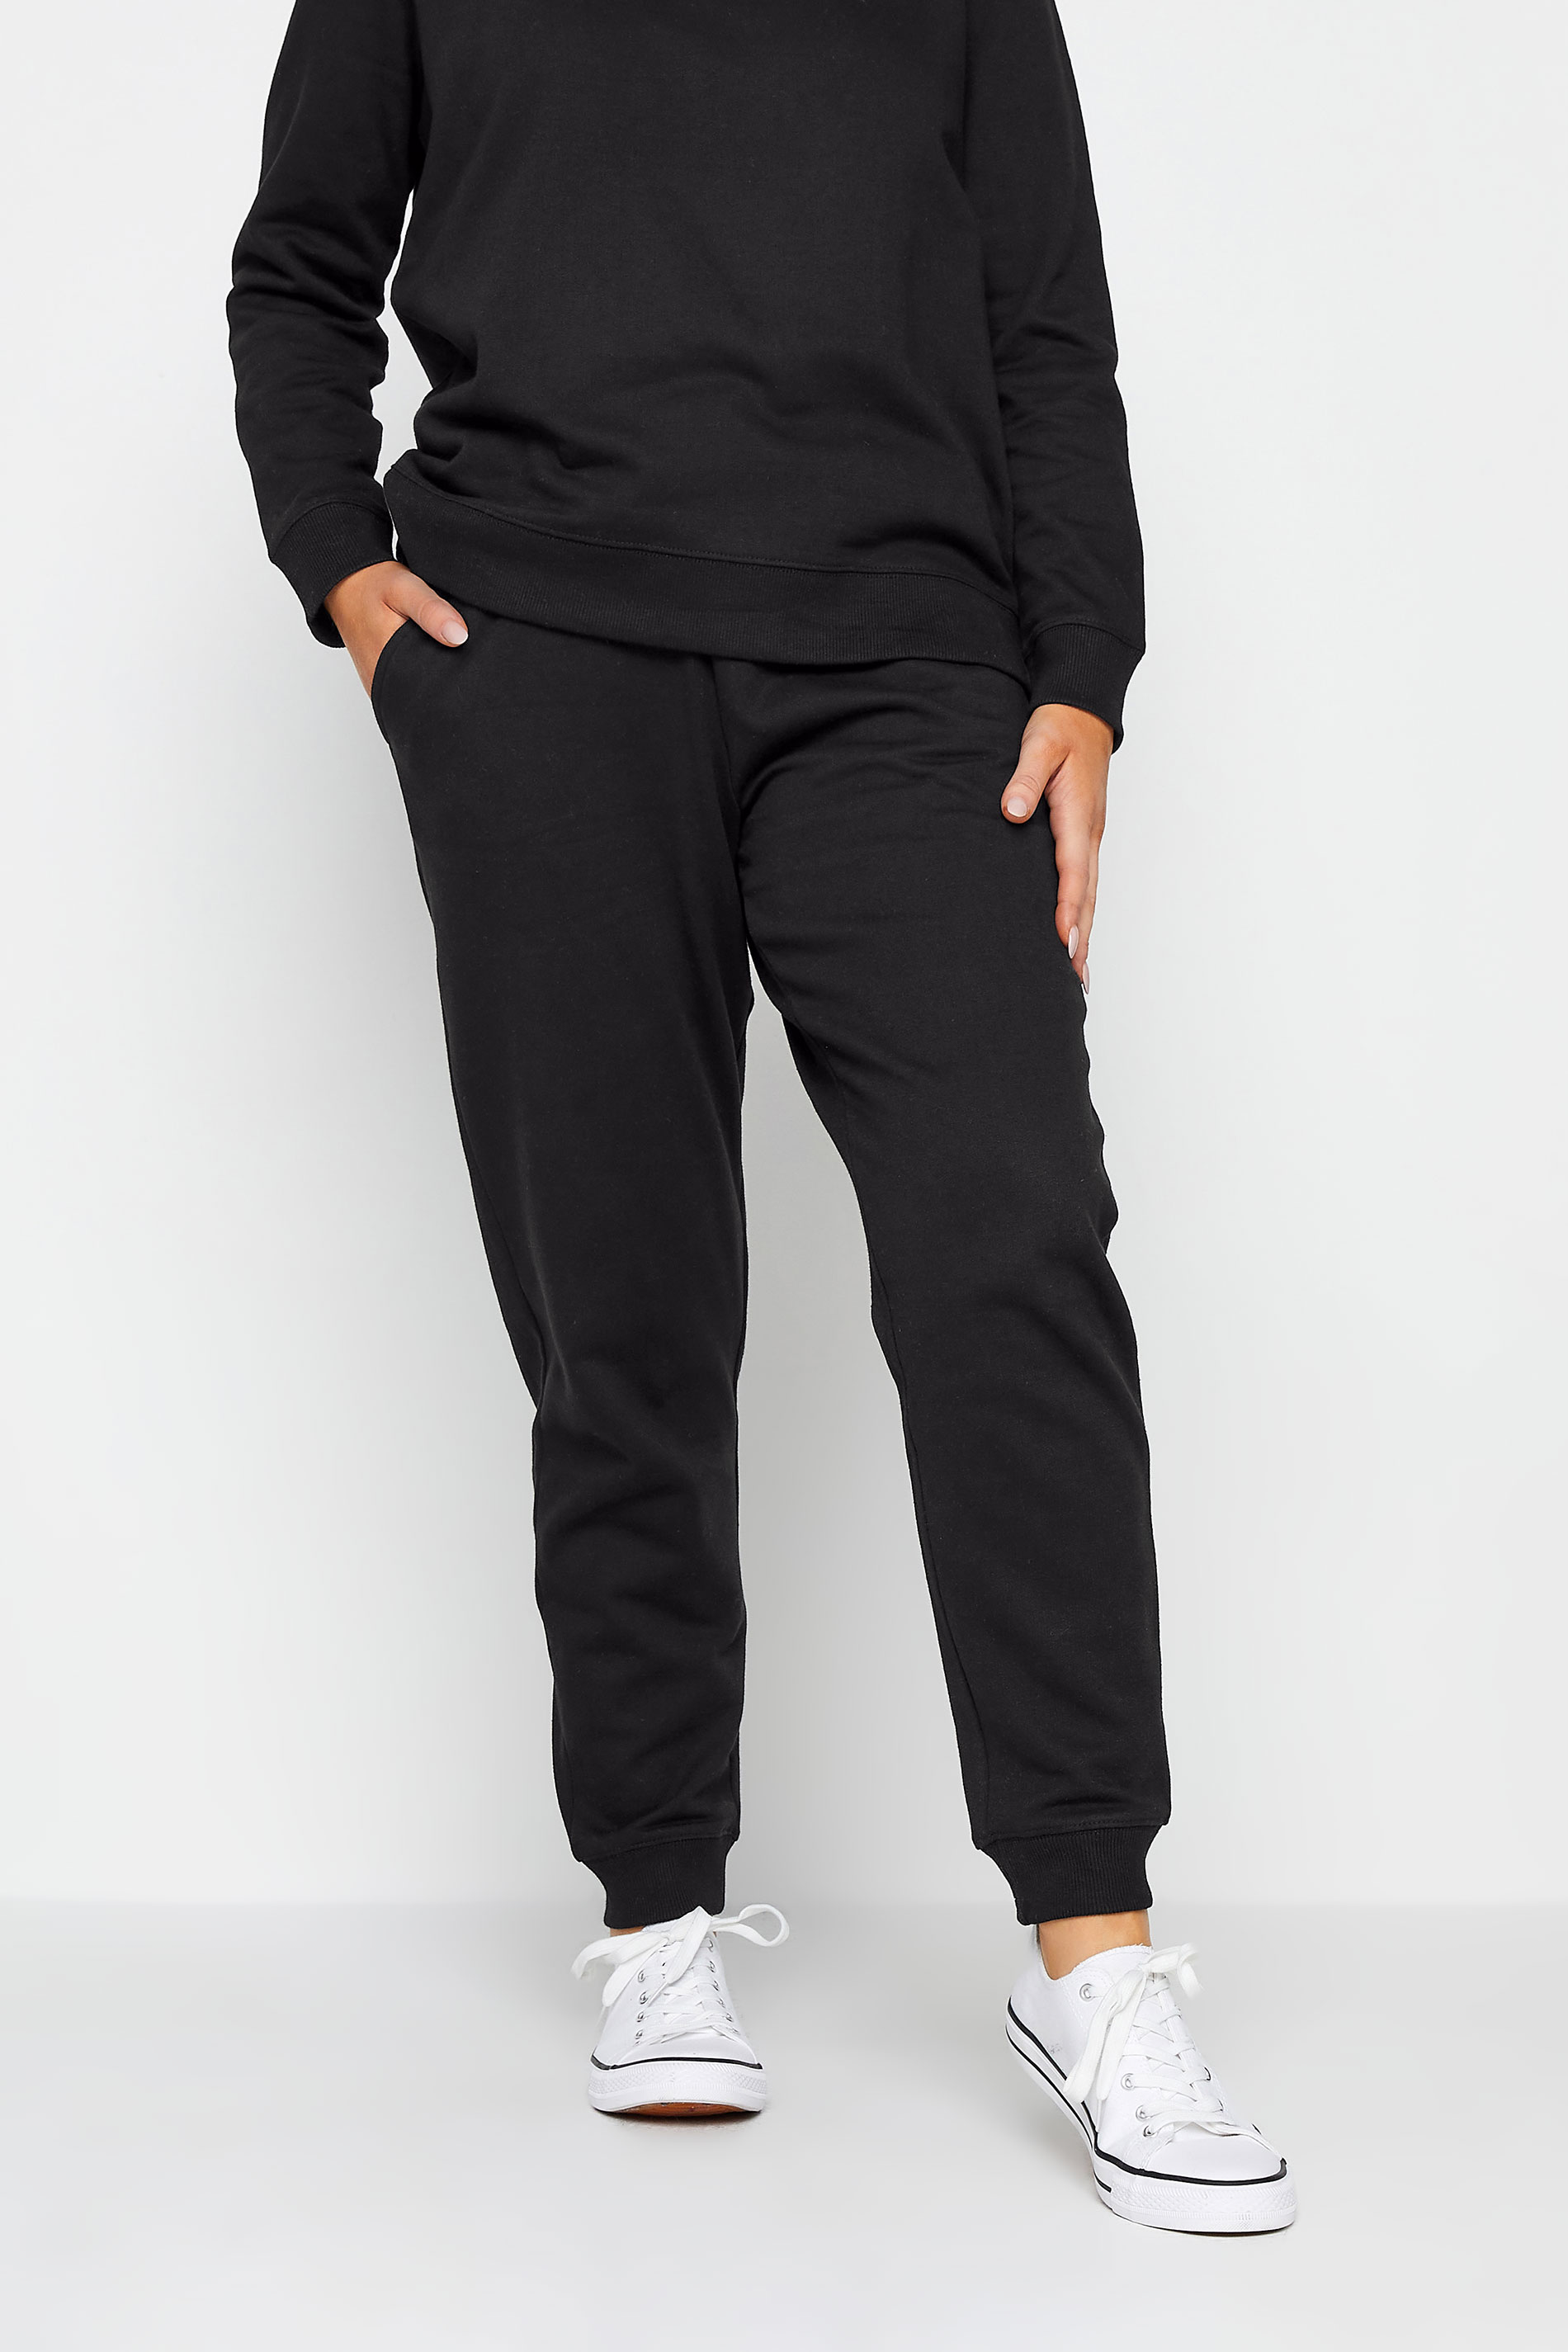 M&Co Black Essential Soft Touch Lounge Joggers | M&Co 1